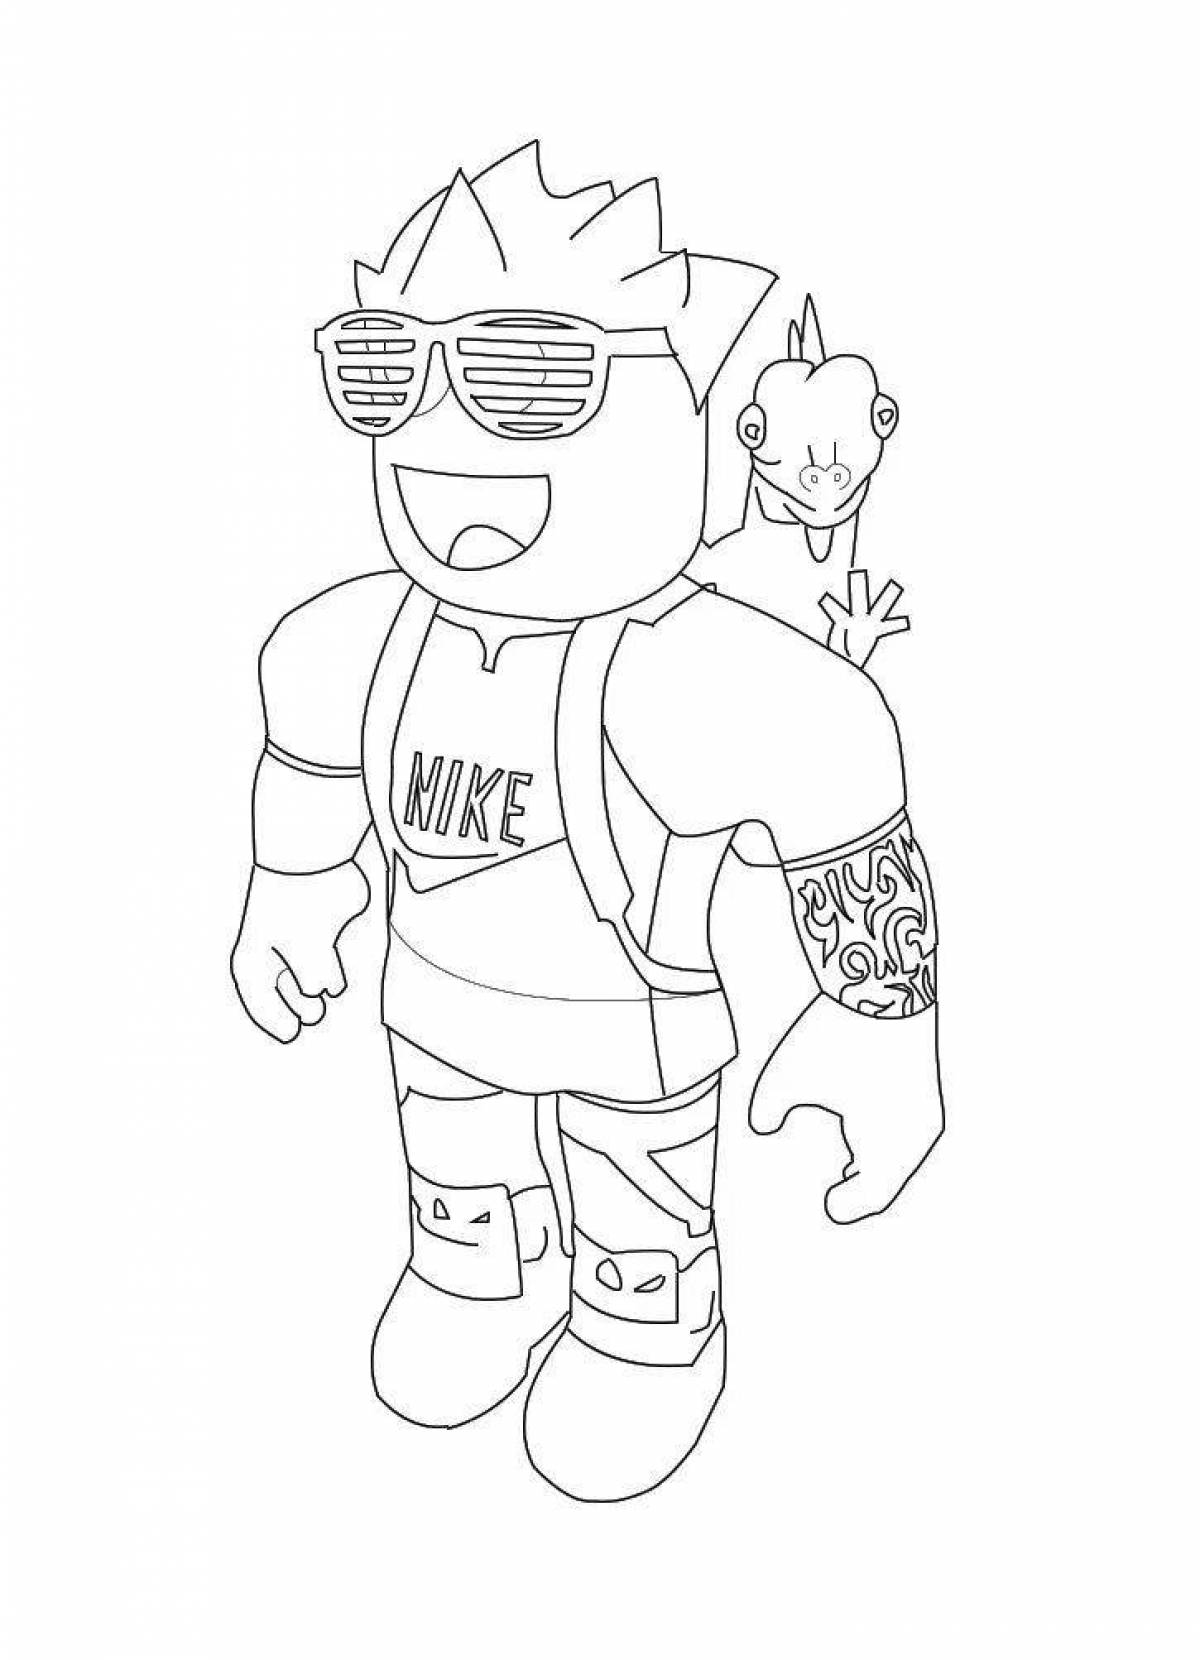 Funny roblox skins coloring page